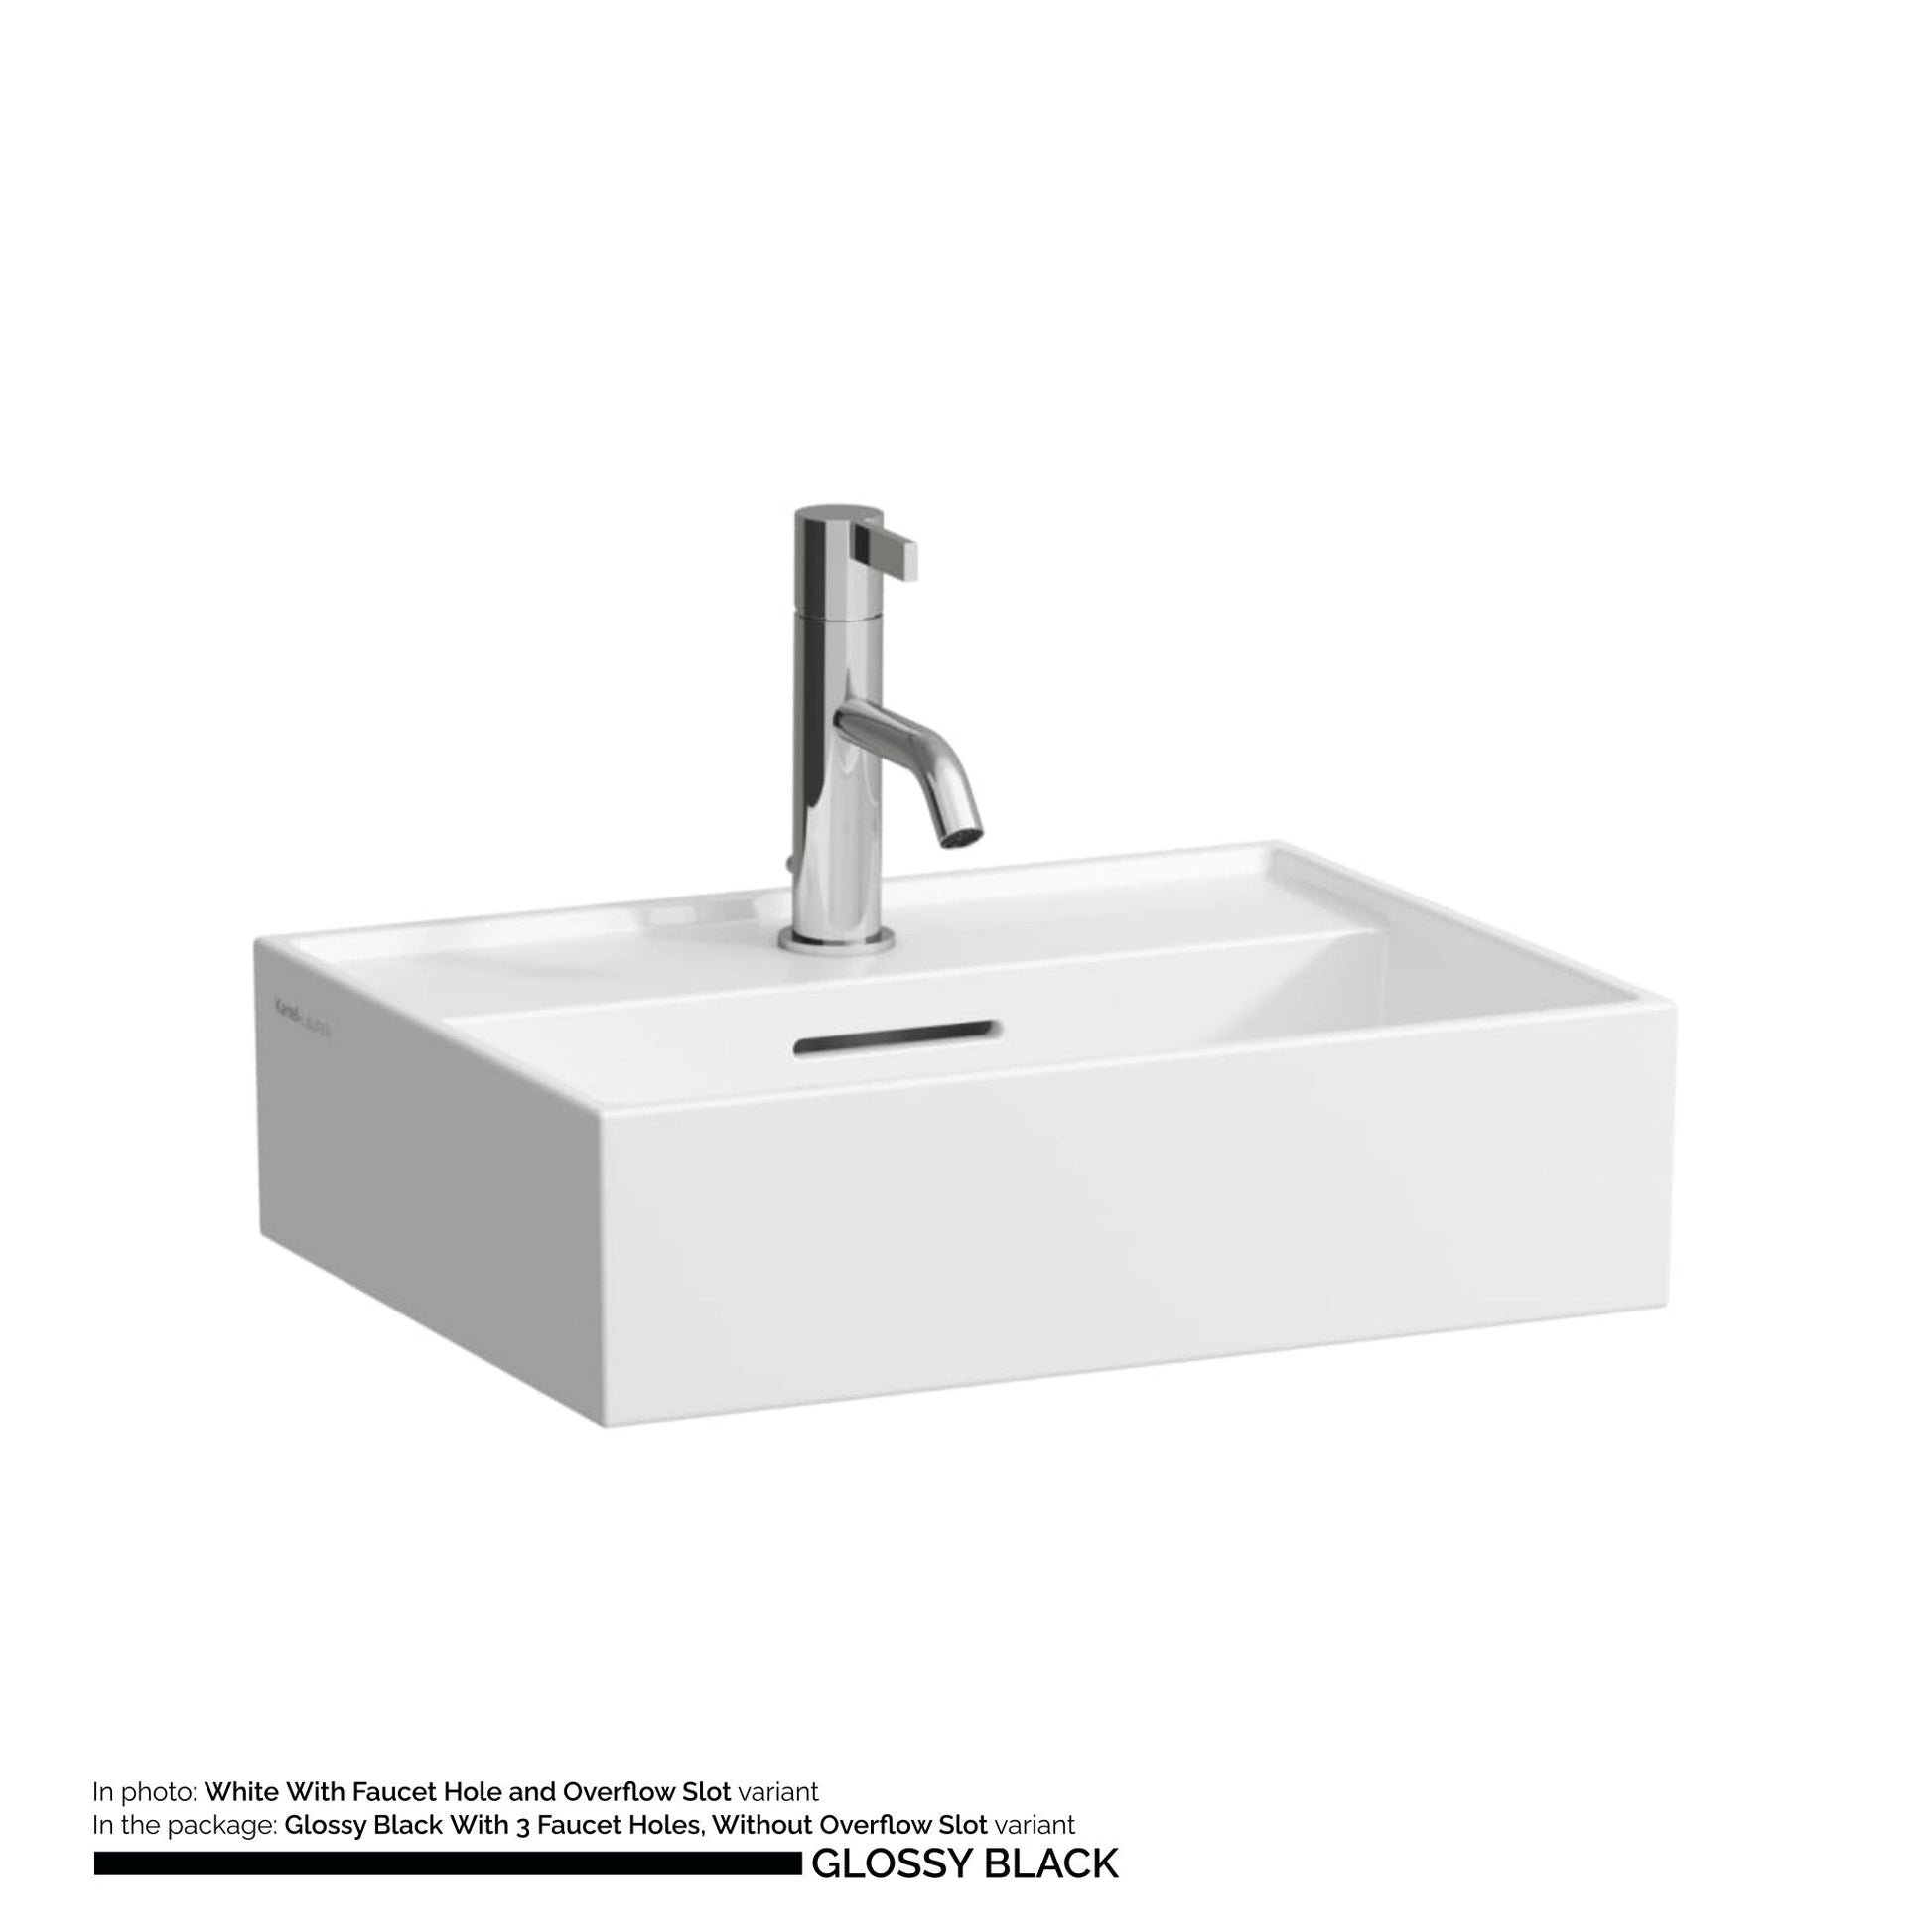 Laufen Kartell 18" x 13" Glossy Black Wall-Mounted Bathroom Sink With 3 Faucet Holes